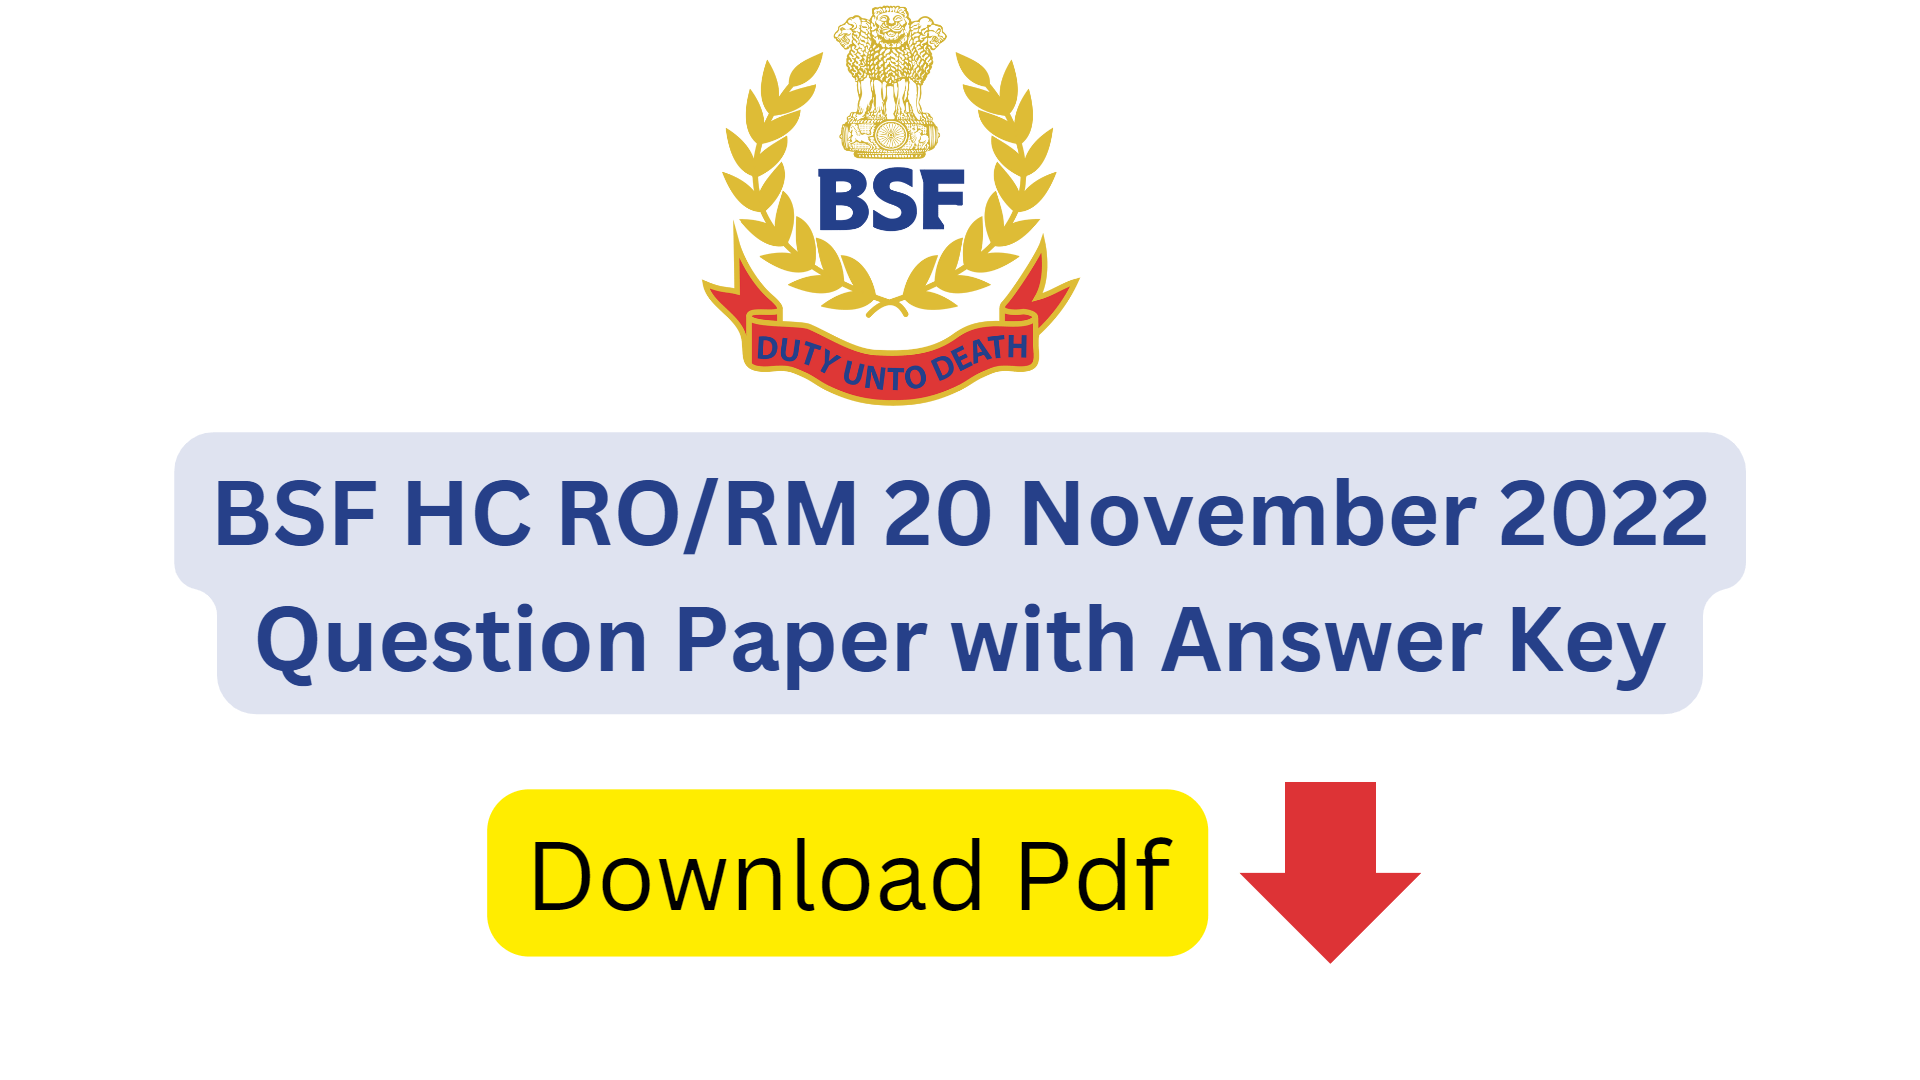 BSF HC RO/RM 20 November 2022 Question Paper with Answer Key